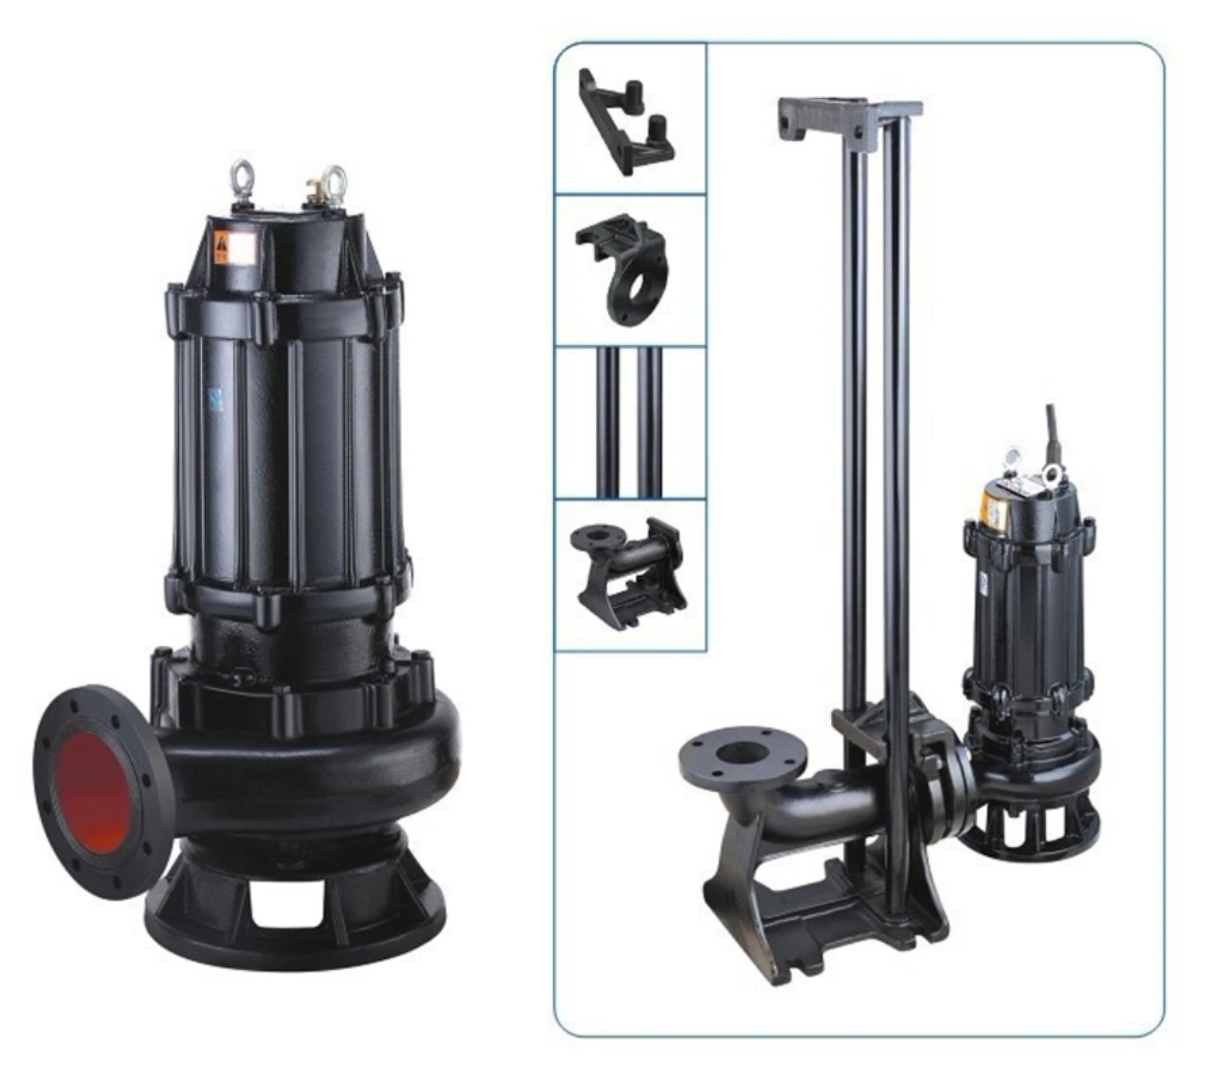 TQW Submersible Sewage Pump can used together with Coupler, and controller